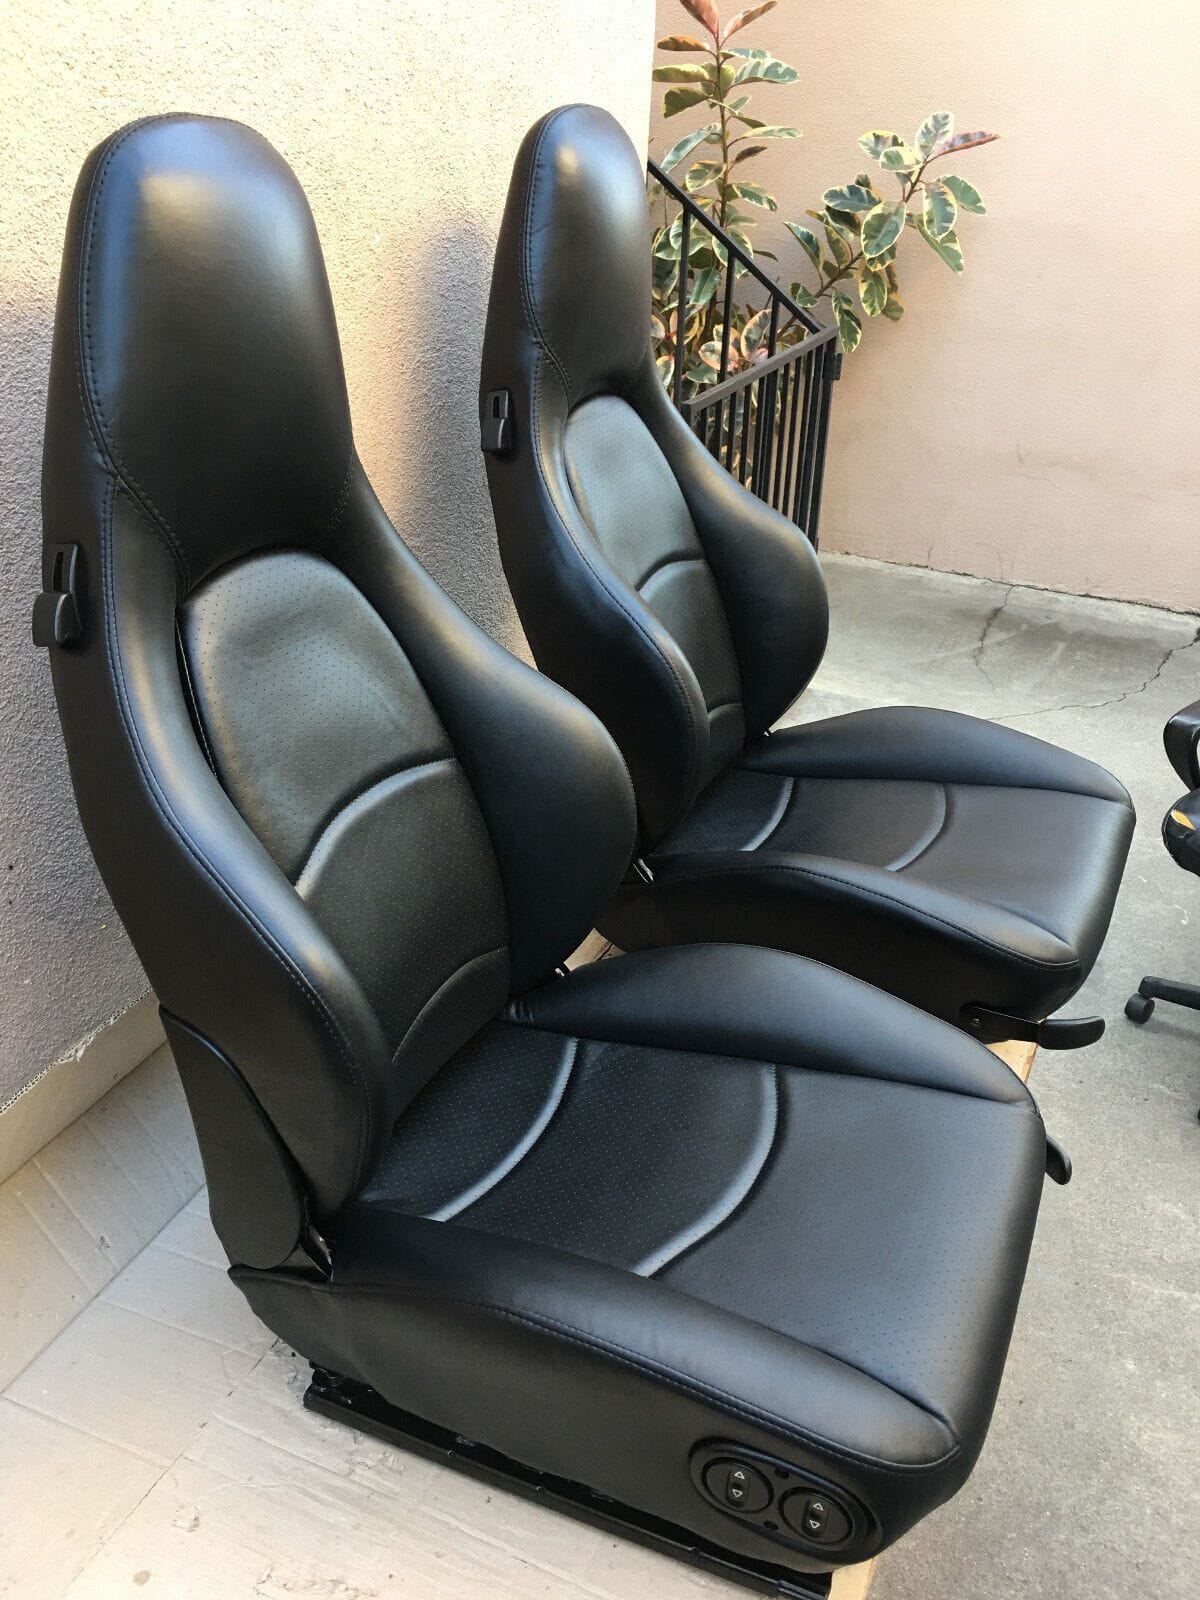 Interior/Upholstery - Porsche 993 Recaro OEM Softback Sport Seats - New - All Years  All Models - South Gate, CA 90280, United States